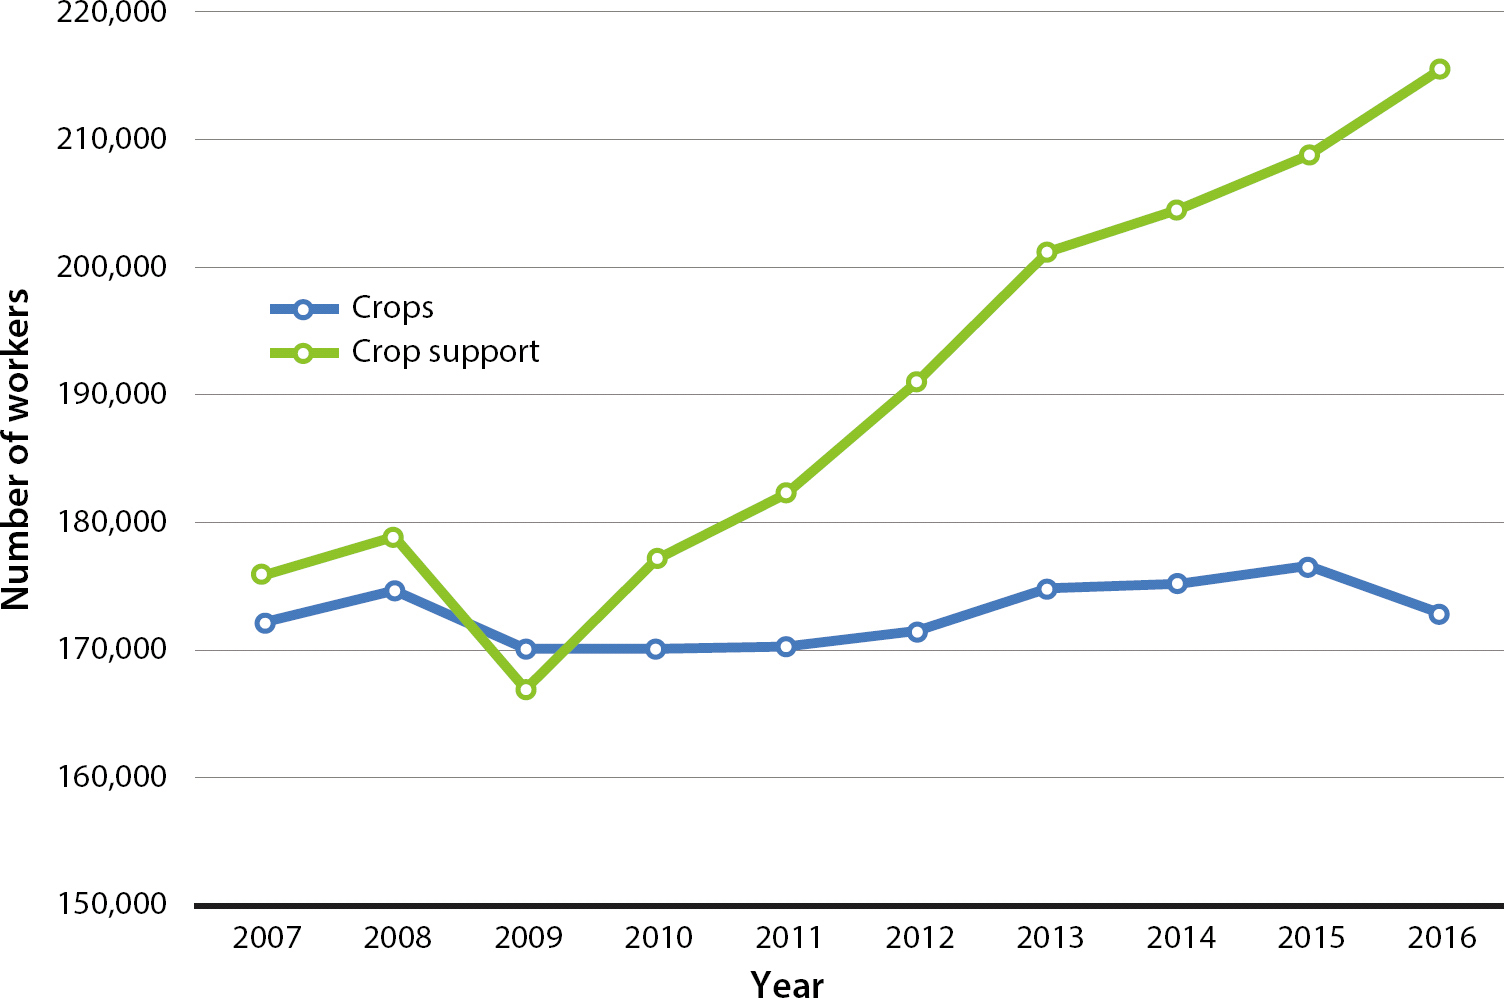 Average California crop and crop support employment, 2007–2016. Crop employment refers to workers hired directly by farmers, and crop support refers to nonfarm employers that bring workers to farms, such as farm labor contractors.